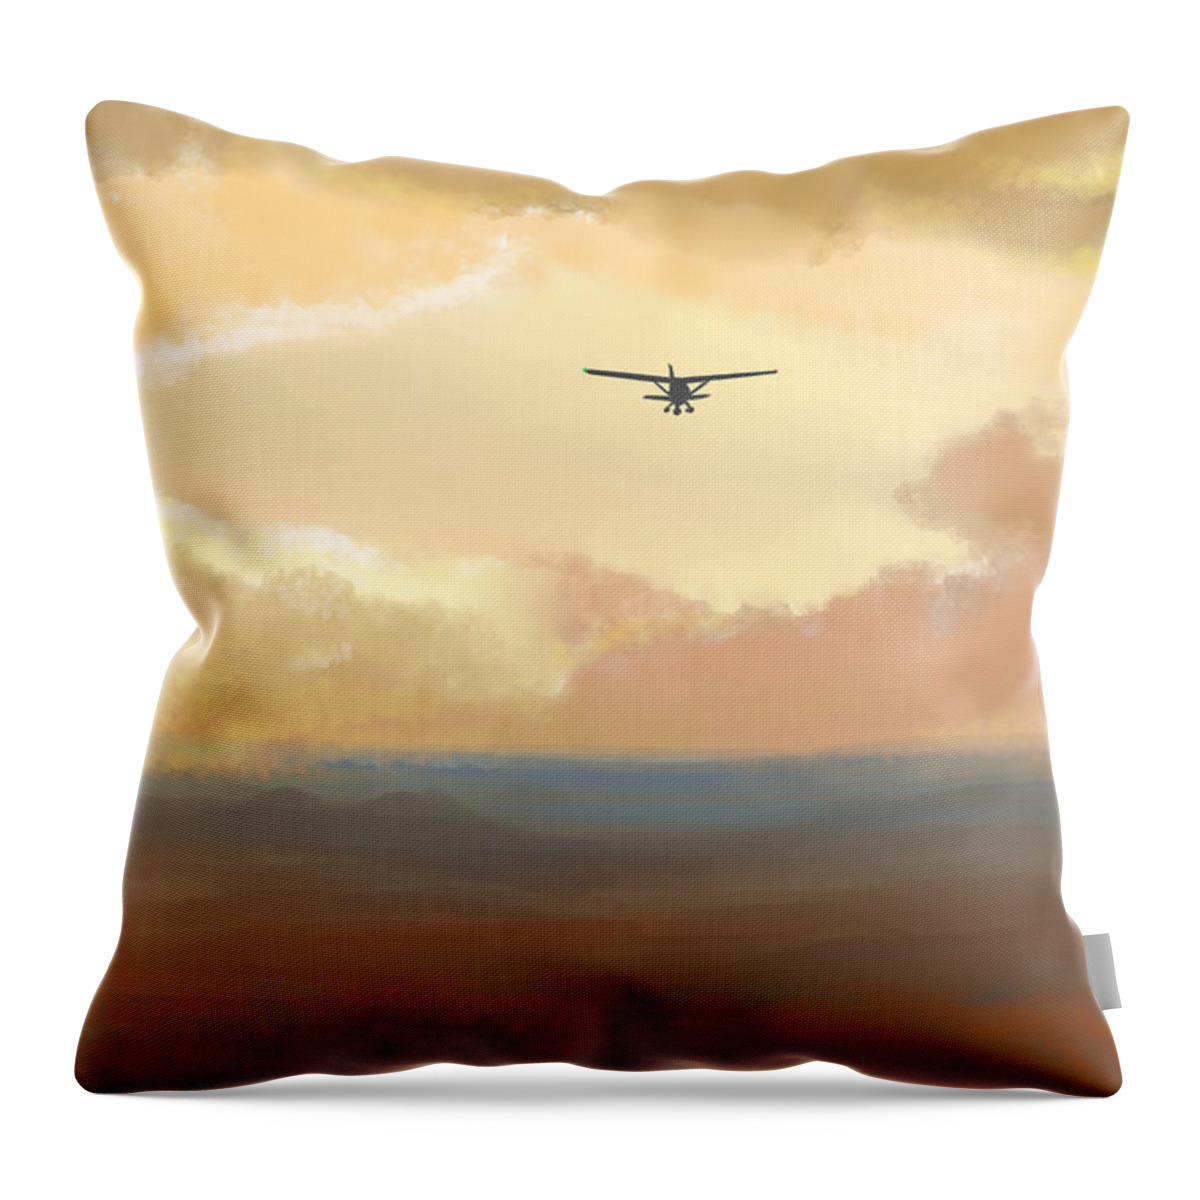 Landscape Throw Pillow featuring the digital art Fly into the Sunset by Rohvannyn Shaw